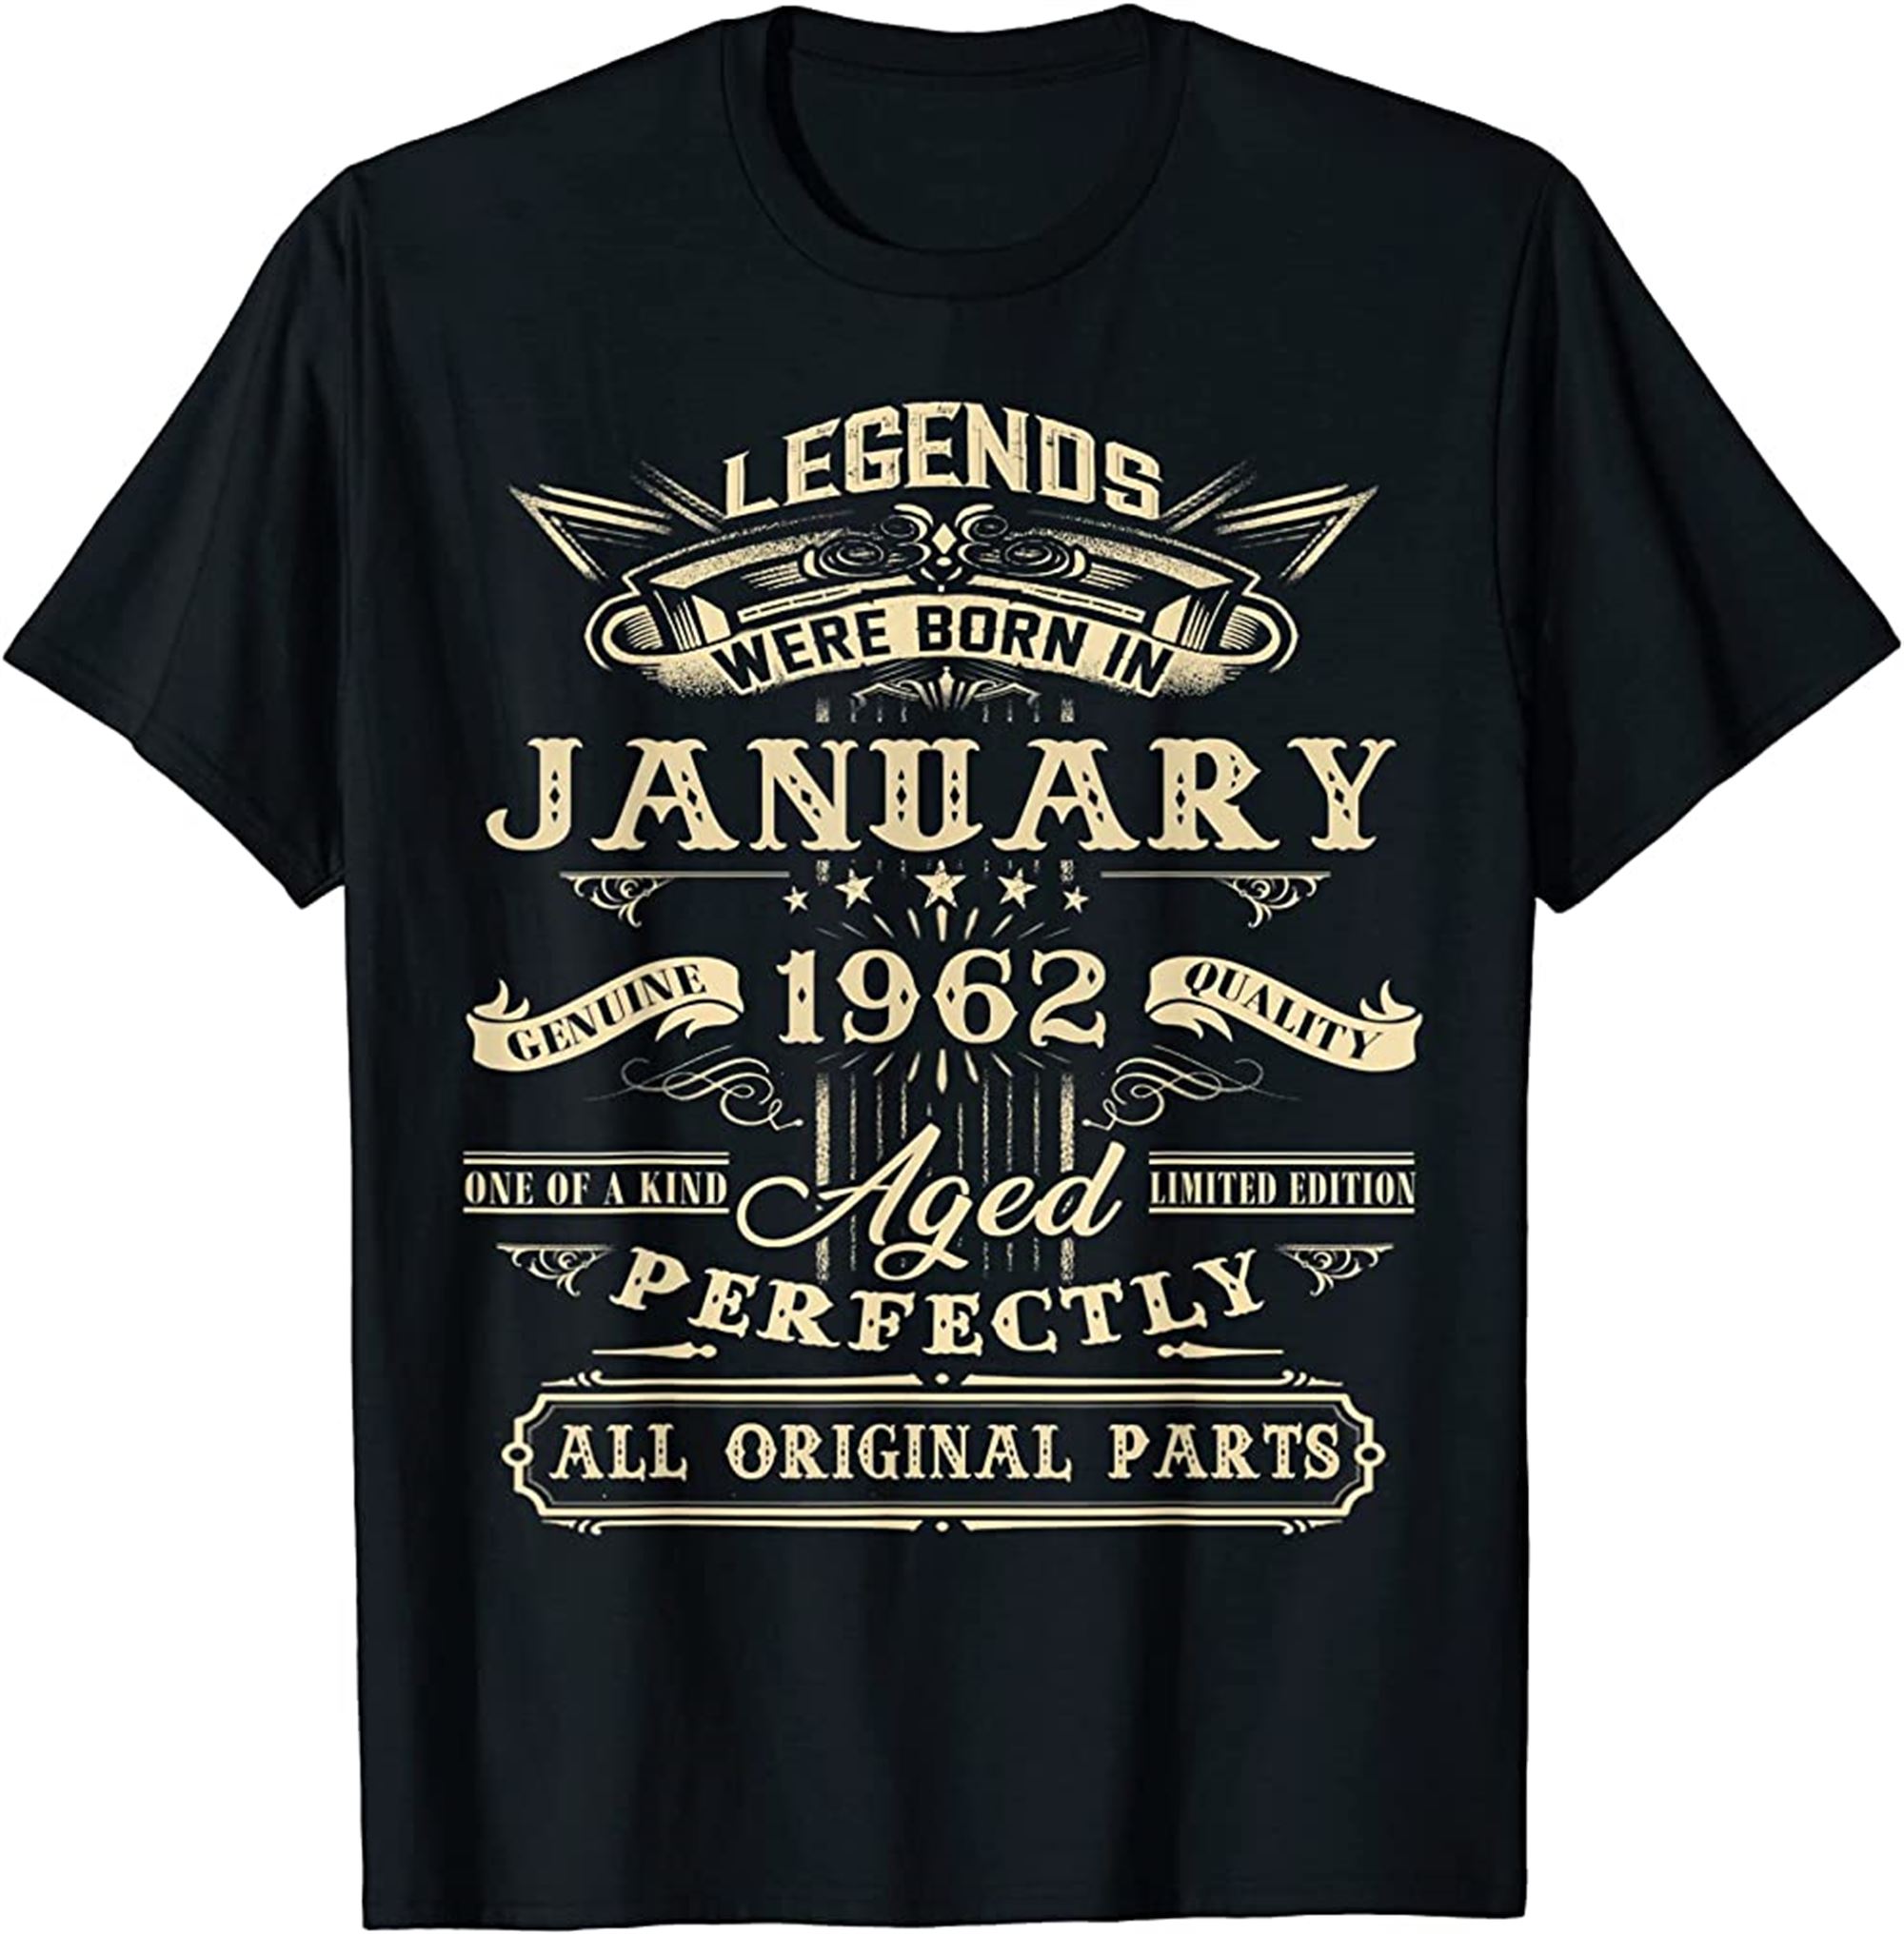 60th Birthday Gift For Legends Born January 1962 60 Yrs Old T-shirt Full Size Up To 5xl